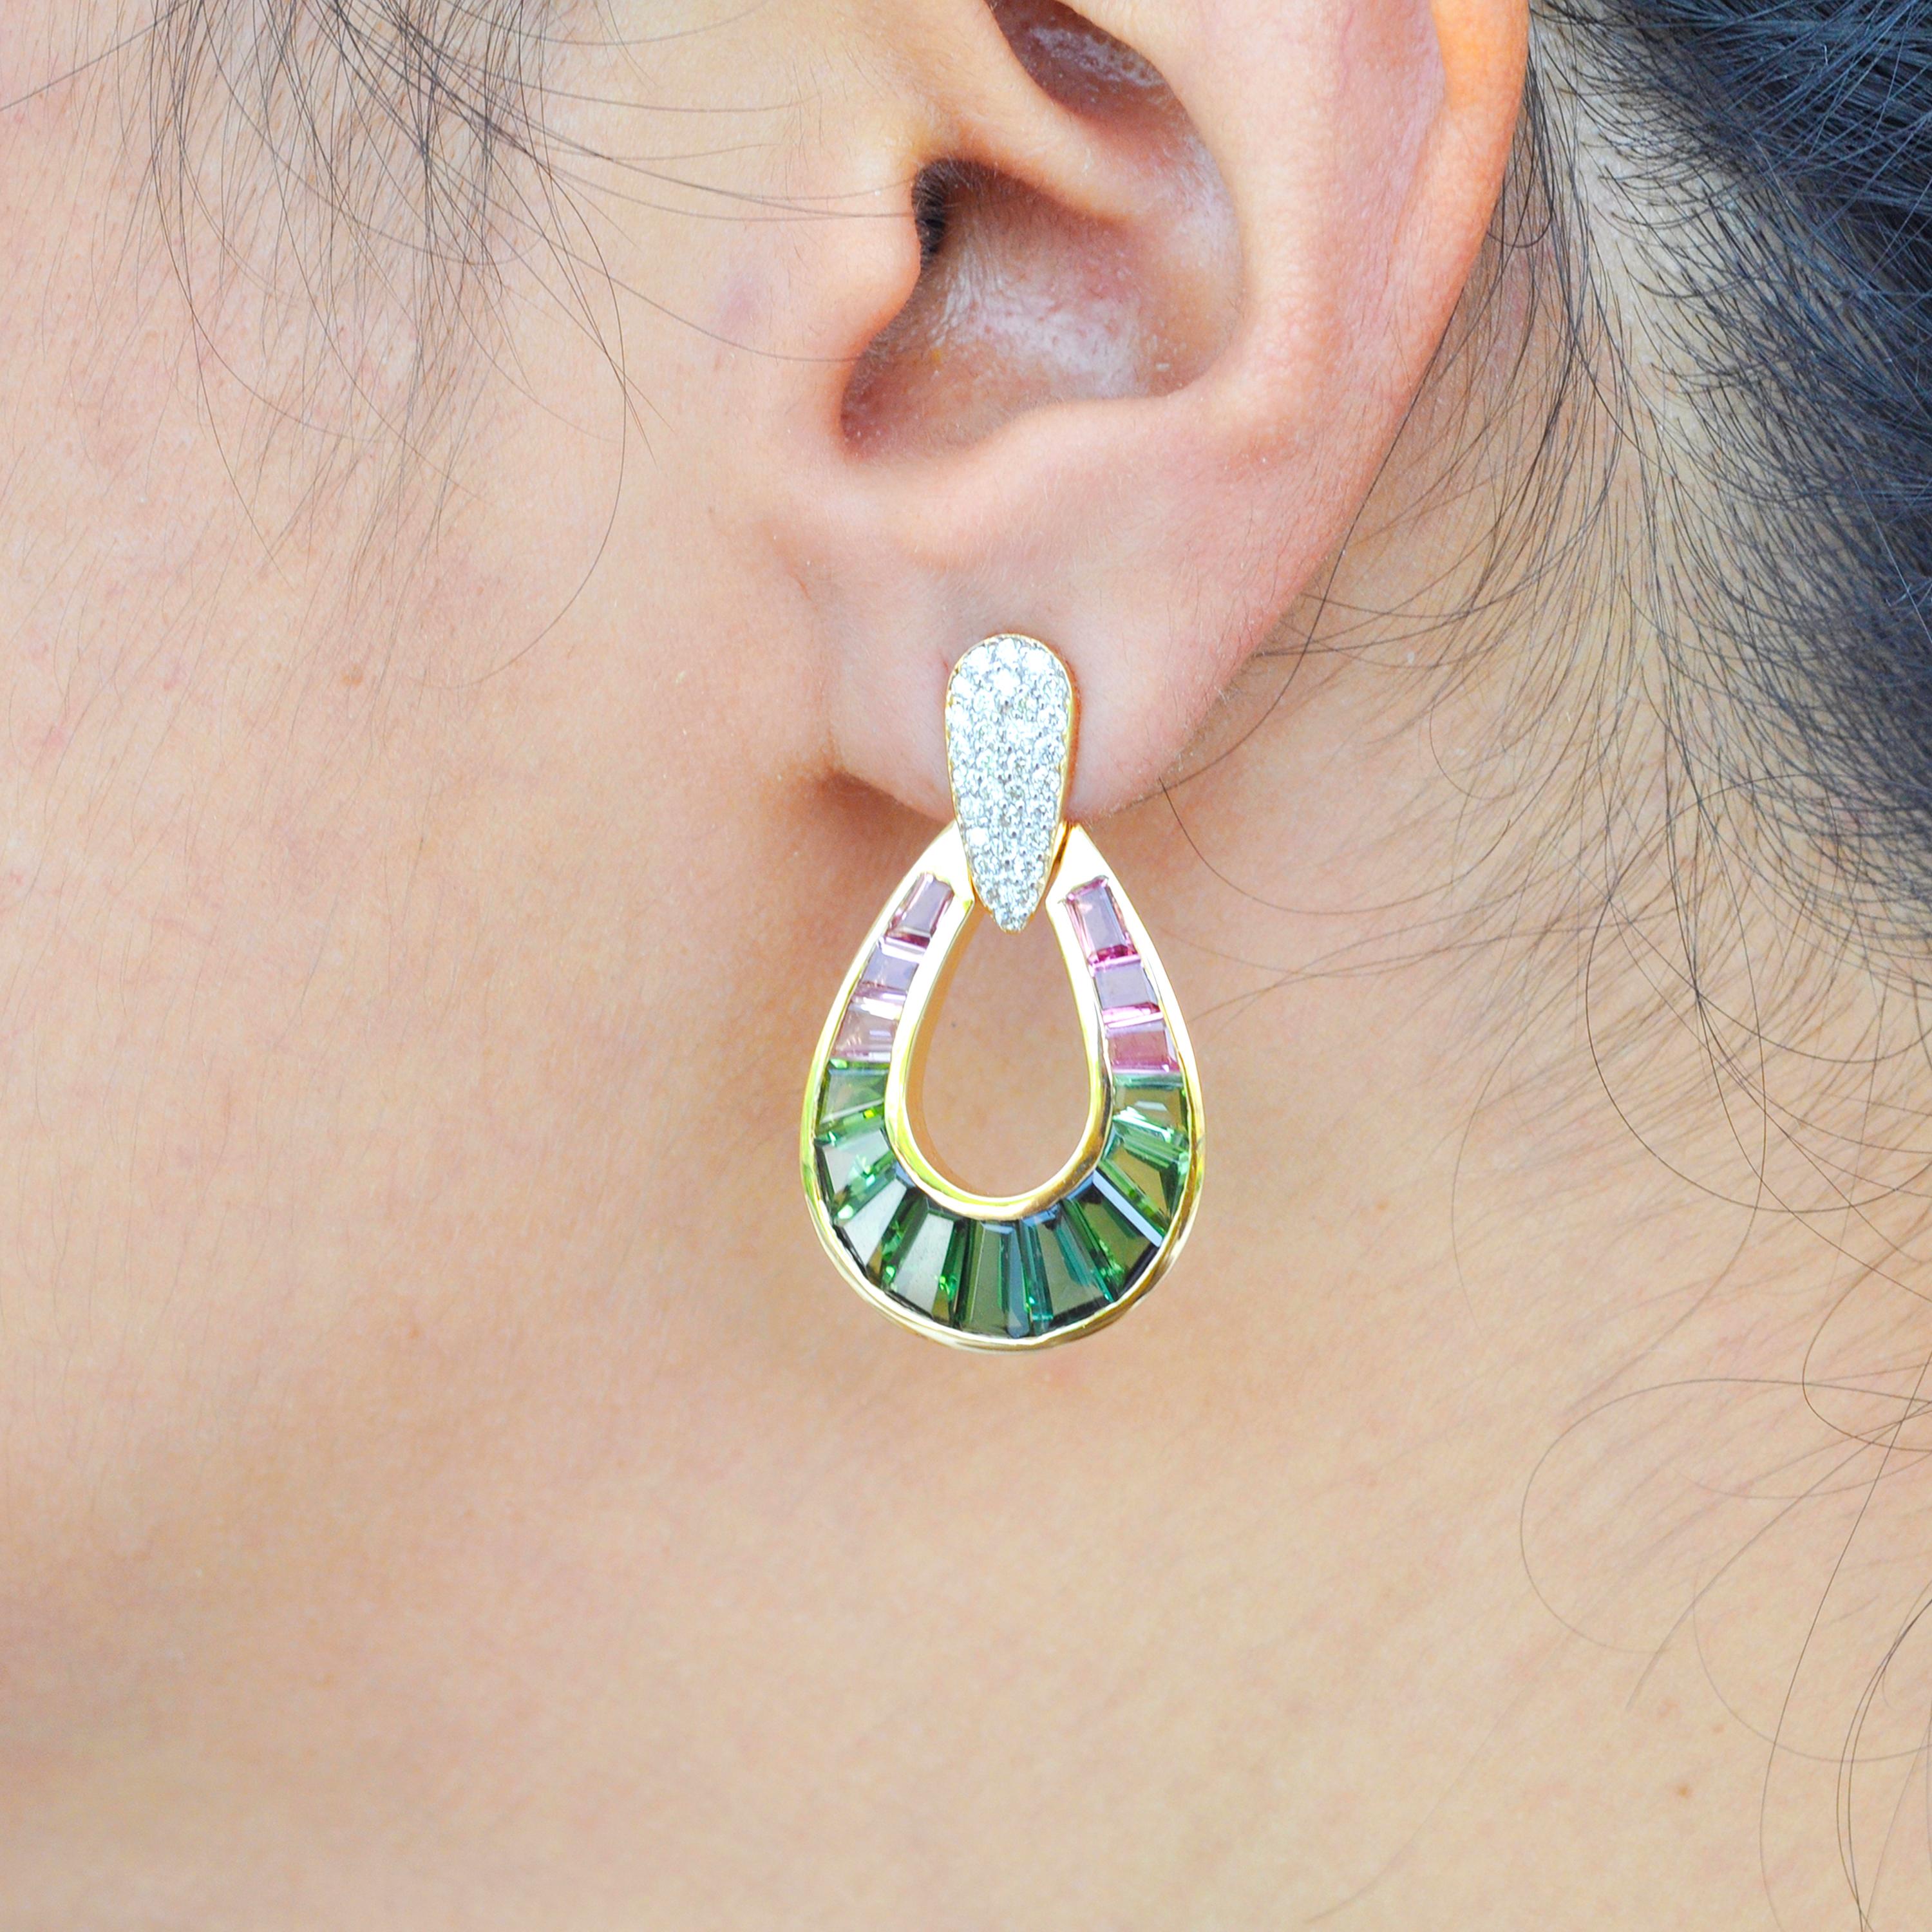 18 karat gold taper baguette green tourmaline and pink tourmaline diamond dangle drop earrings

Watermelon tourmalines are exotic, always. Inspired by it's colours, these earrings feature lustrous caliber cut green and pink tourmalines, meticulously